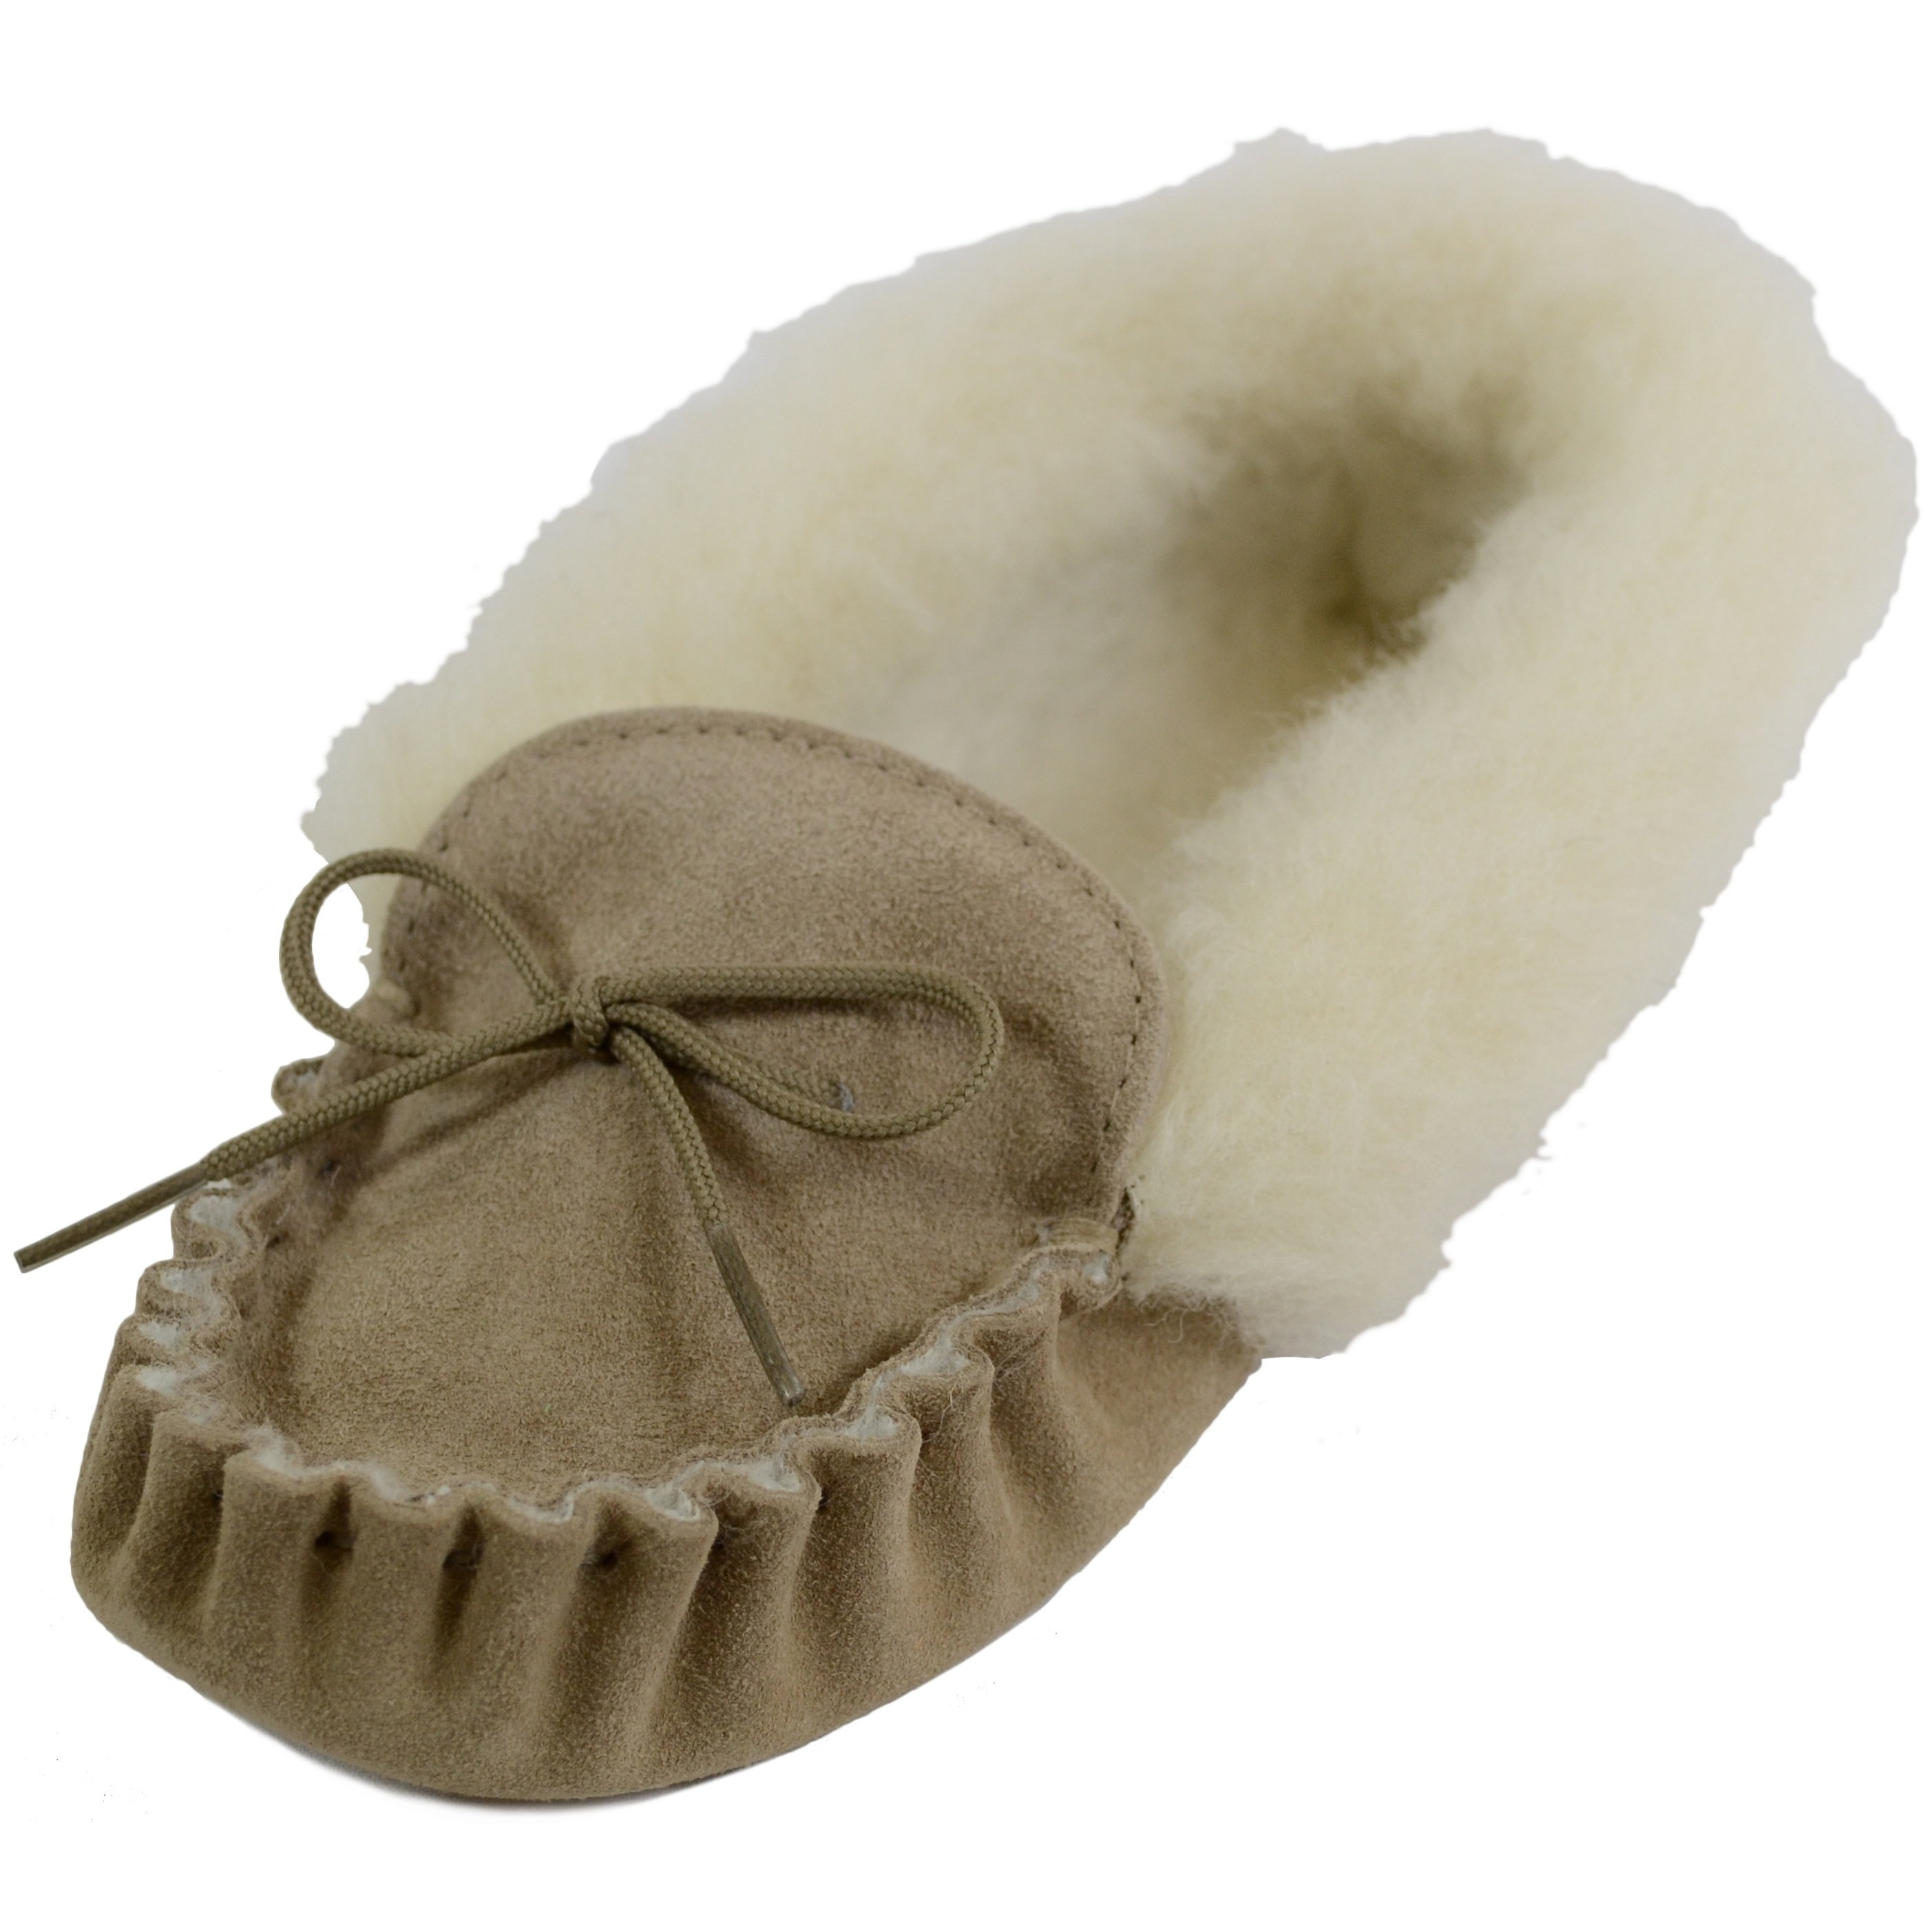 ladies suede moccasin shoes uk